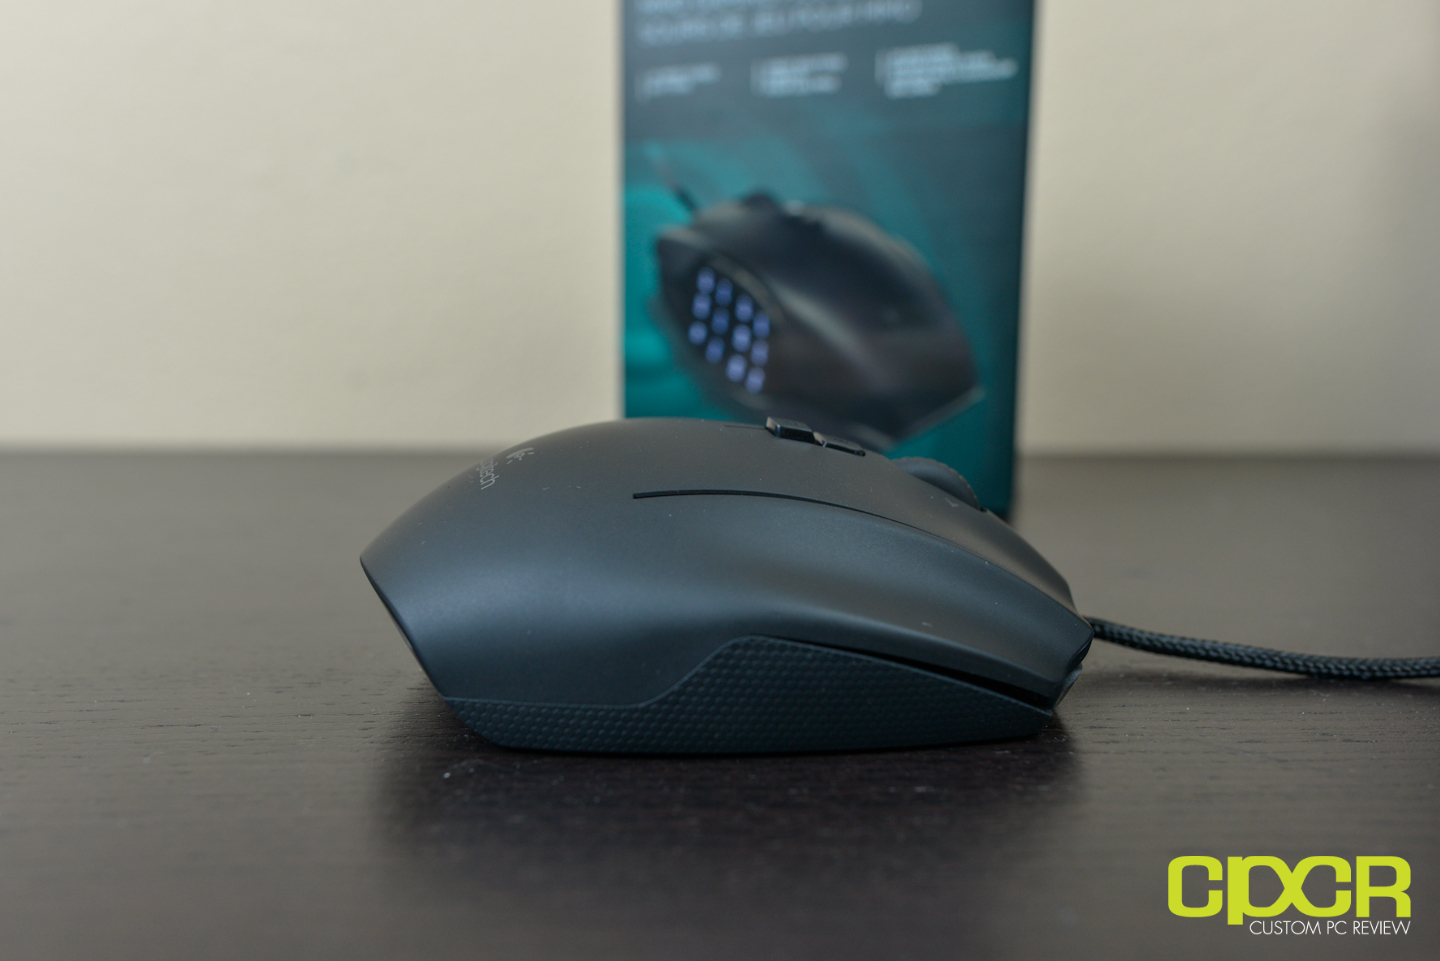 Logitech G600 MMO Gaming Review 